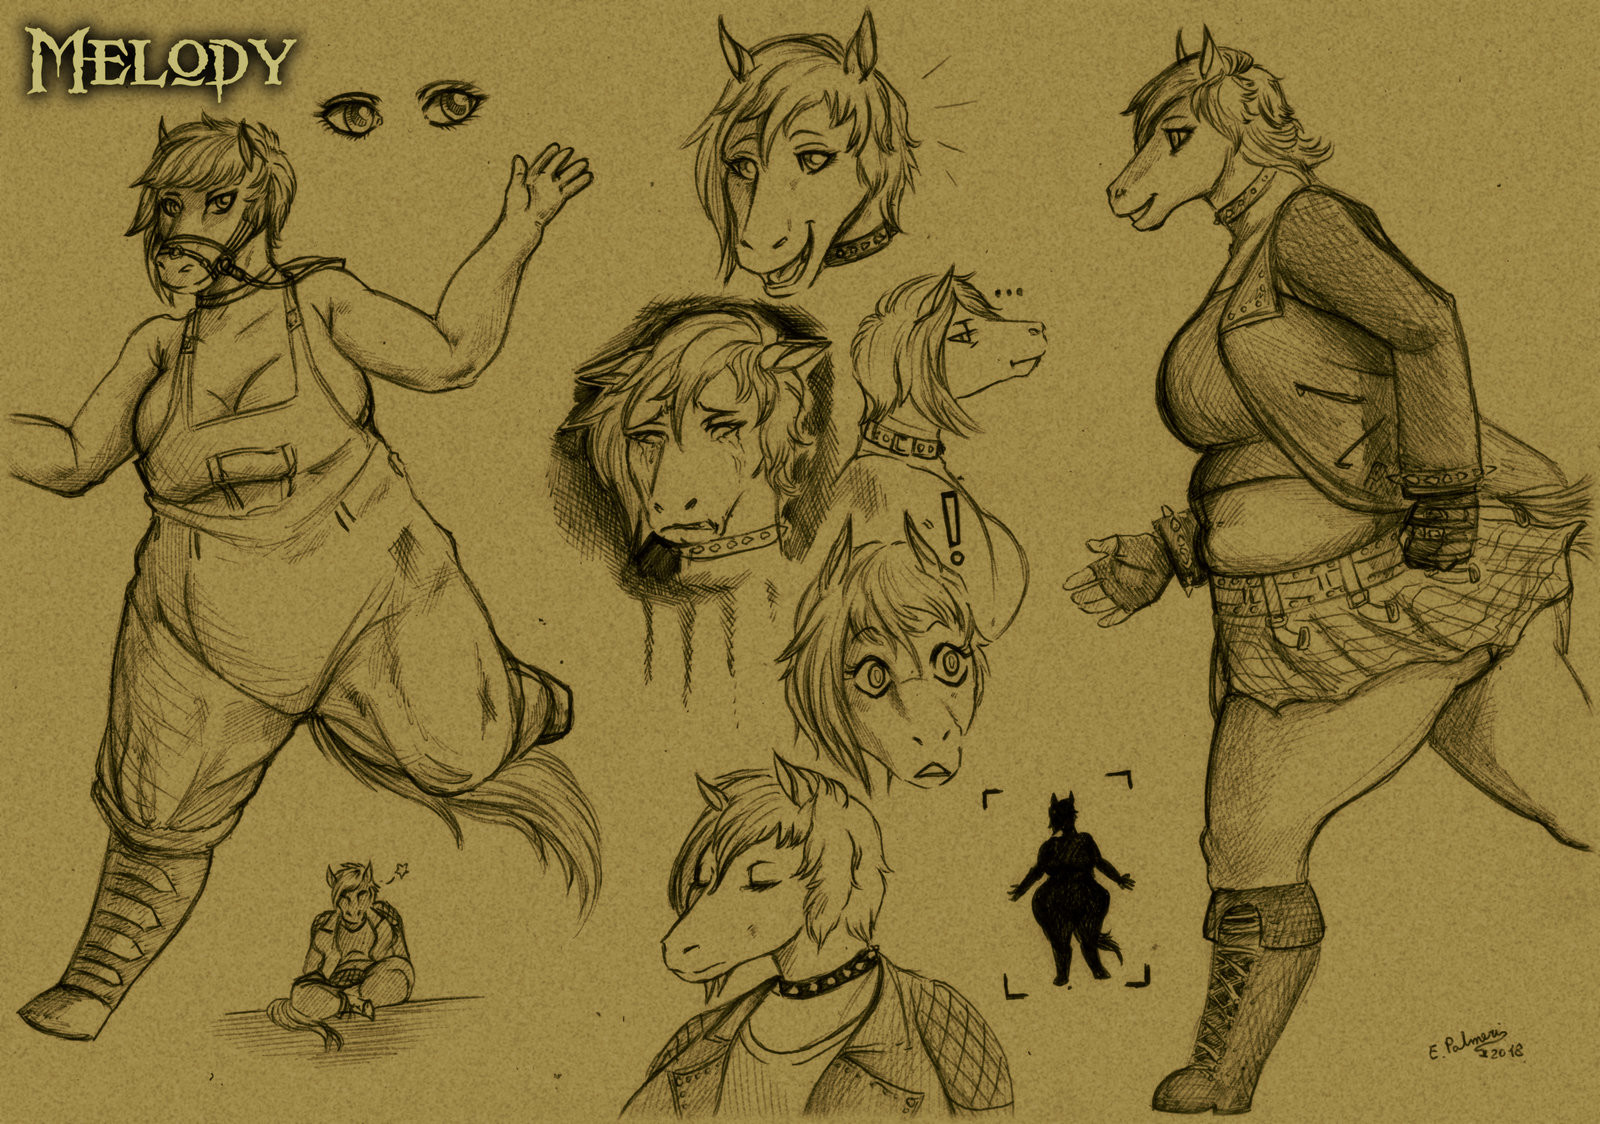 Study on the character of Melody the rock/punk horse, commission for Thalane.Dragonness